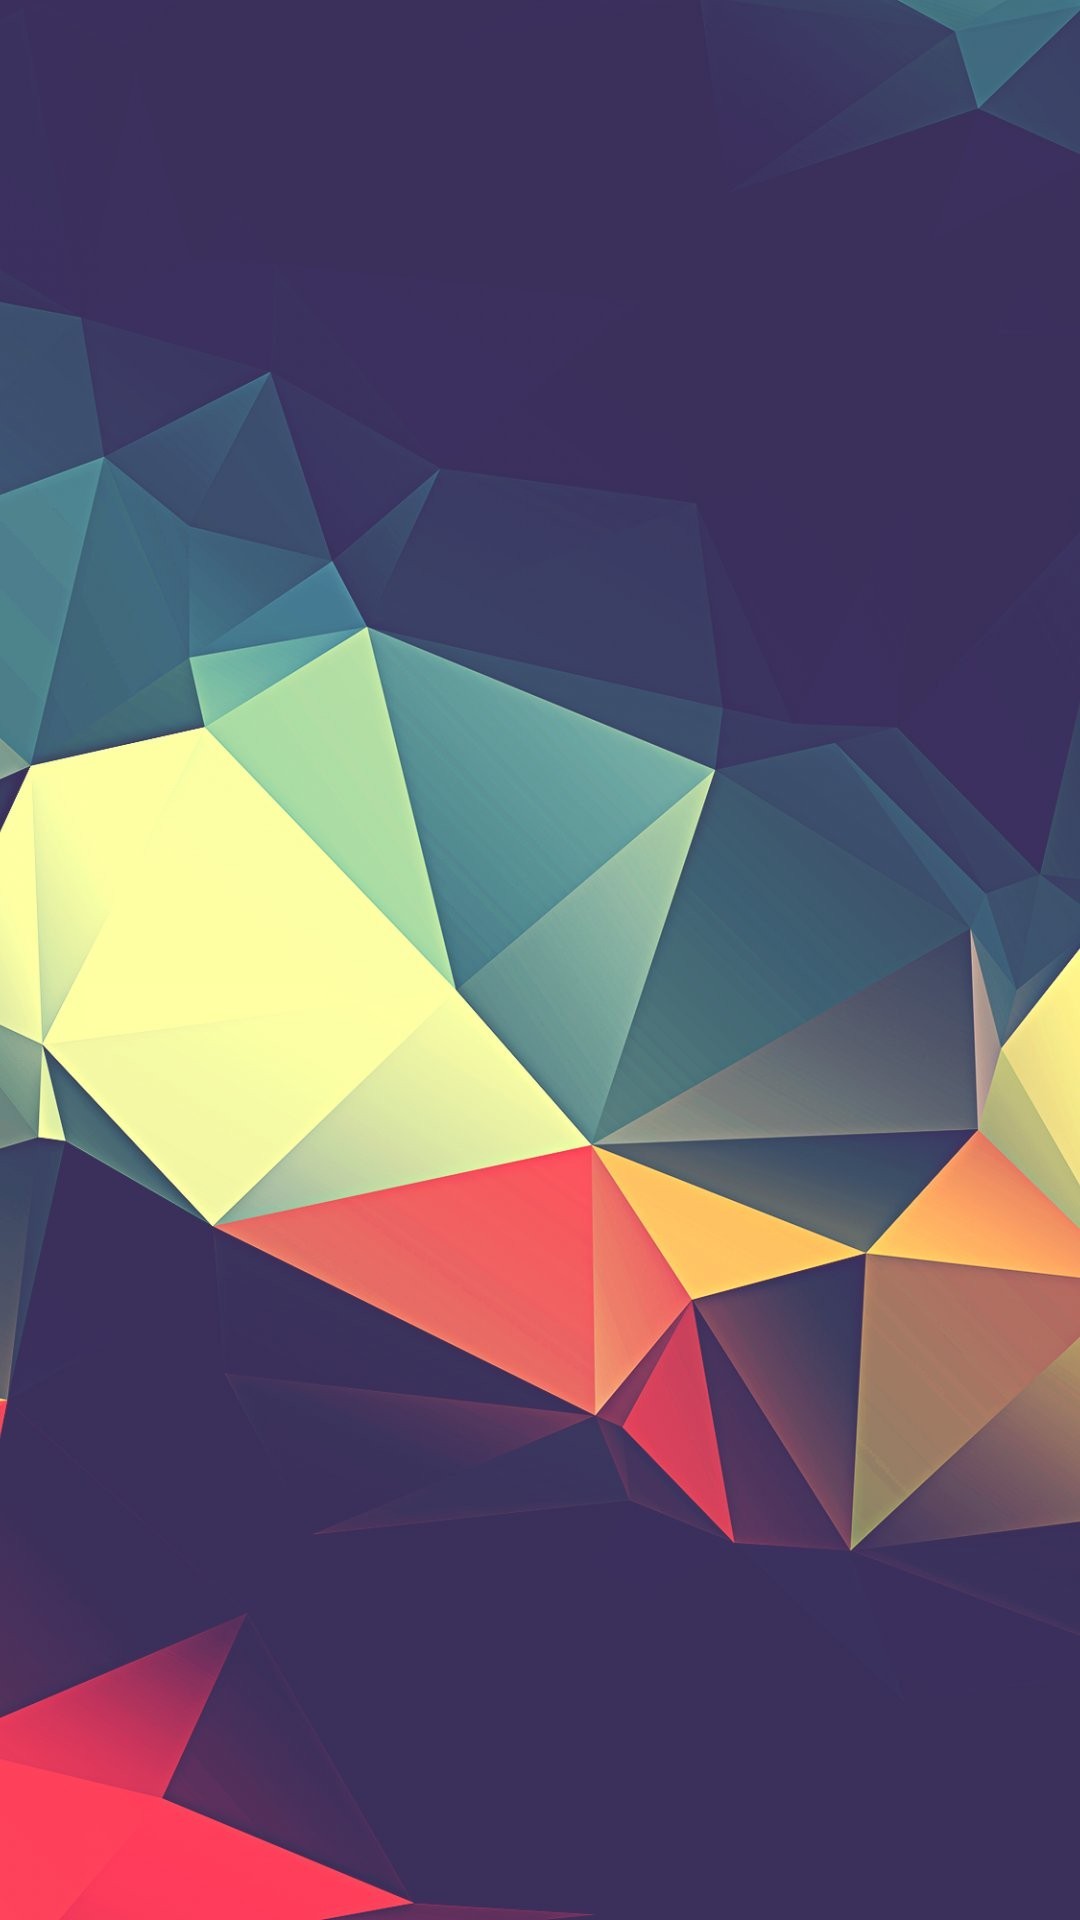 1080x1920 Low Poly iPhone 6 Plus Wallpaper 35941 - Abstract iPhone 6 Plus Wallpapers  # Abstract #